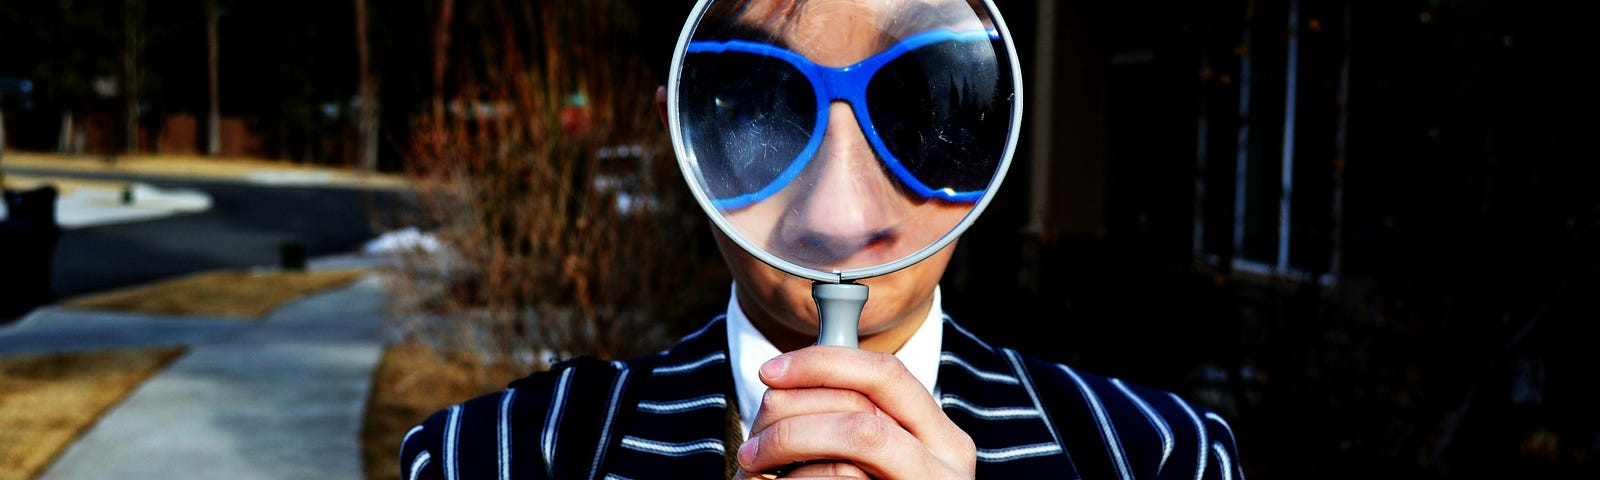 woman with dark curly hair and big blue sunglasses, wearing a black wide-pinstripe suite and white collared shirt, standing outside on sidewalk, holding a big magnifying glass to her face.